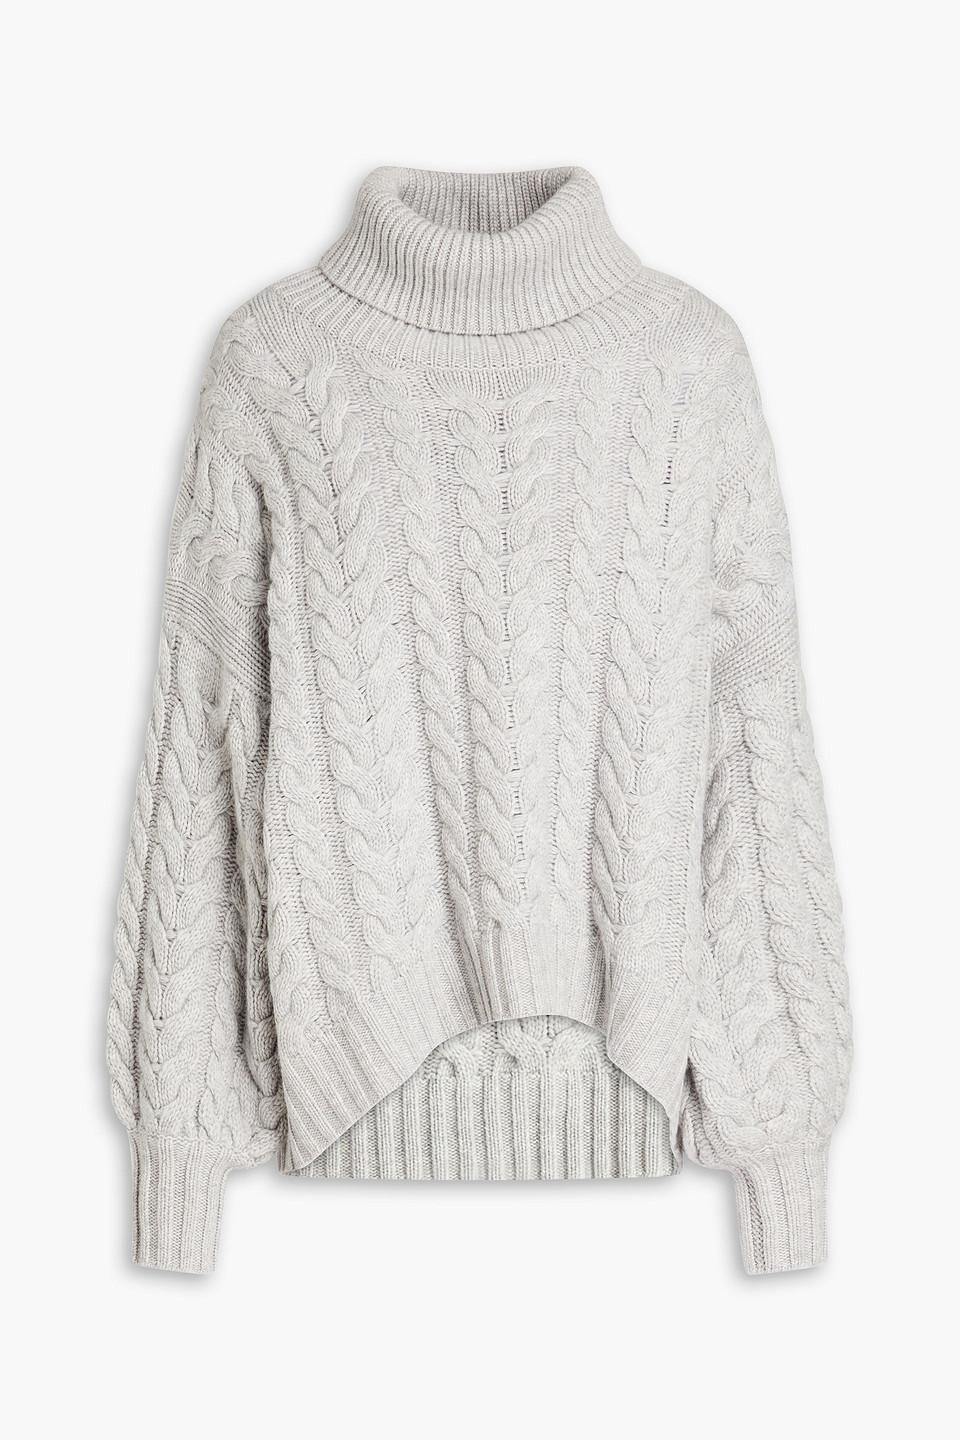 N.Peal Cashmere Oversized Cable-knit Cashmere Turtleneck Sweater in White |  Lyst